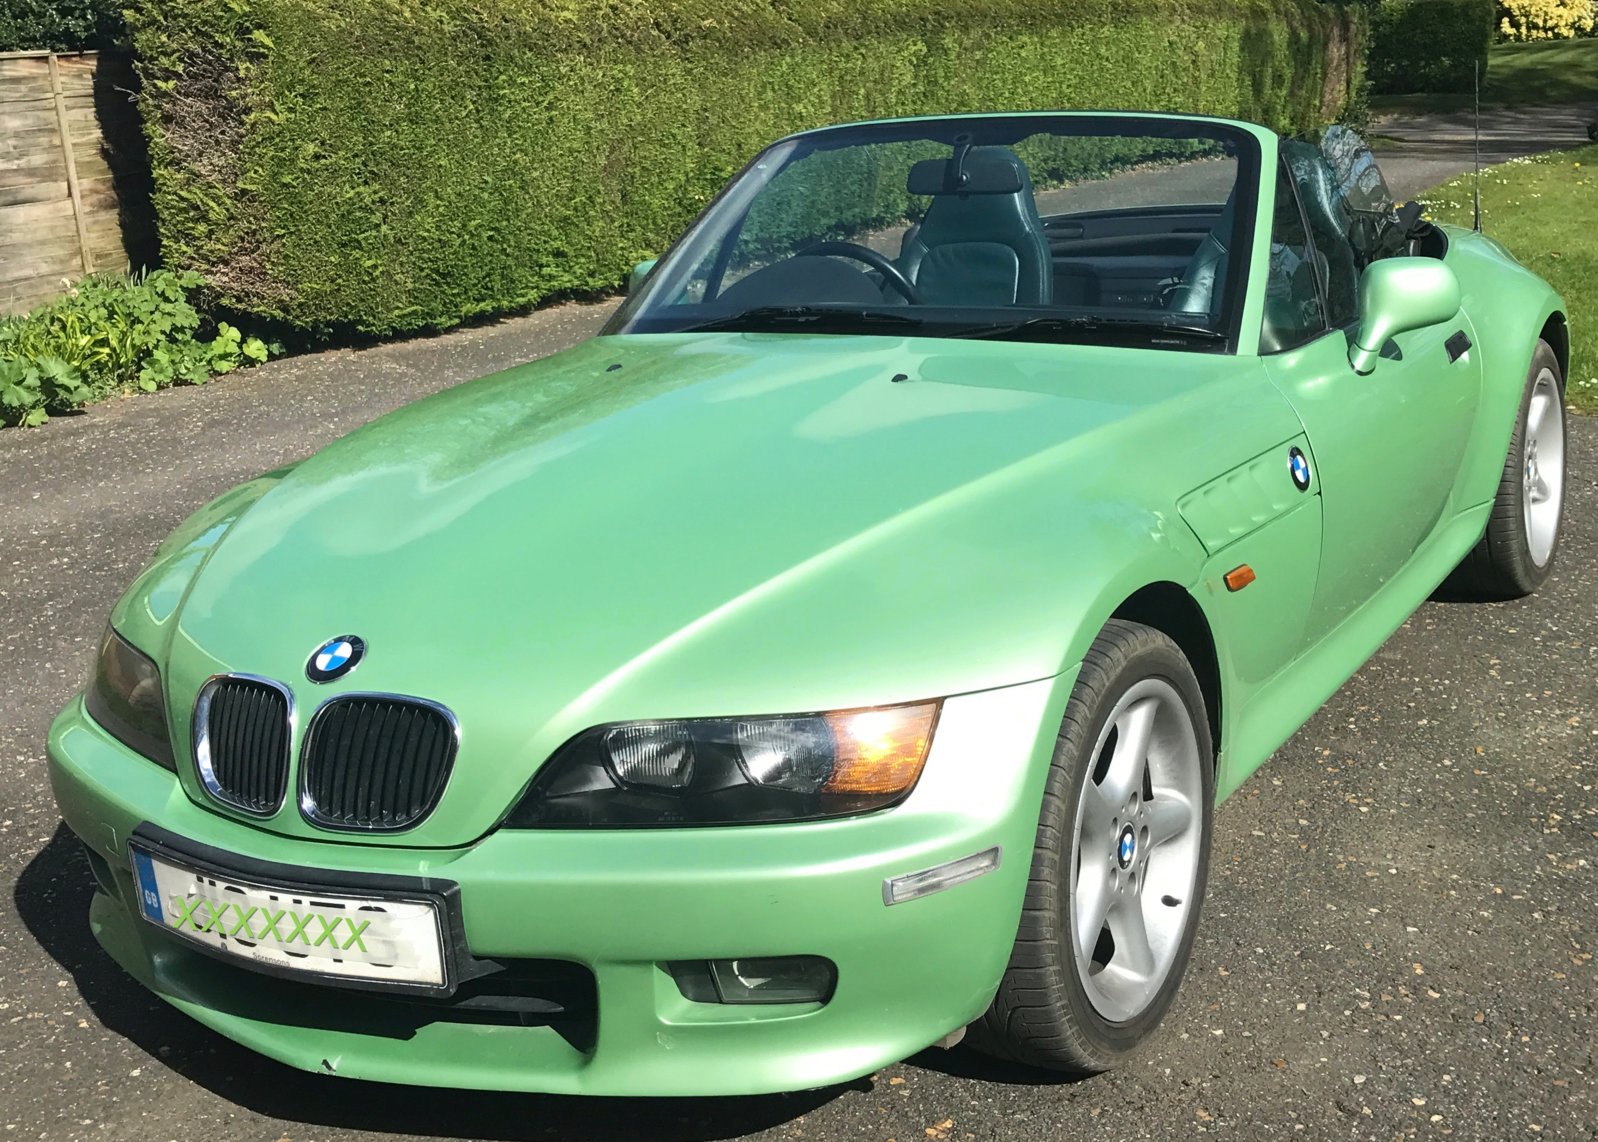 My green Z3. 1998 owned from new.